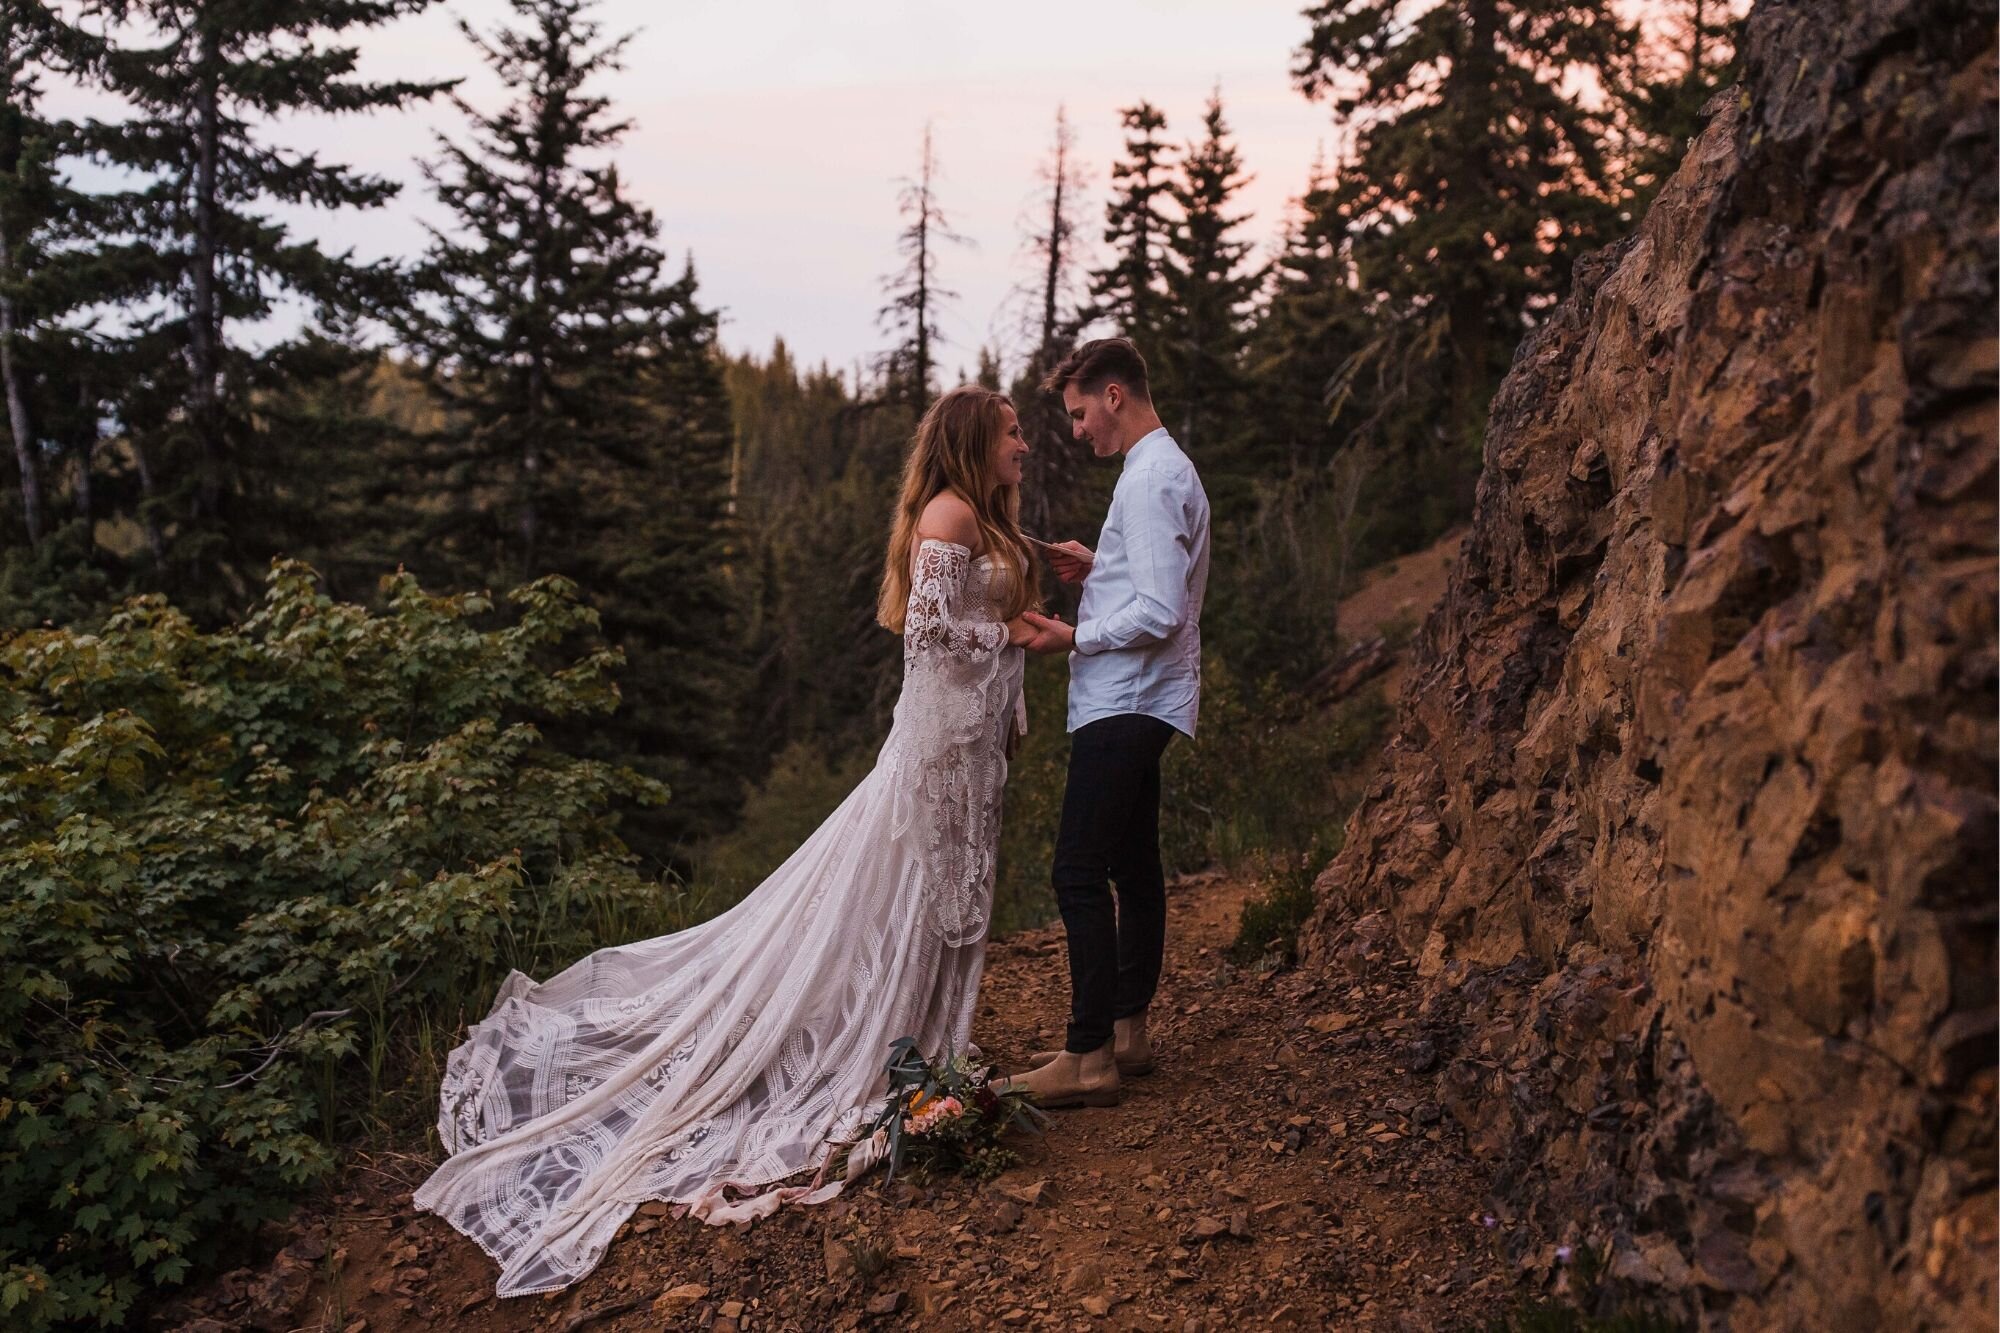 Top Three Places for Your Seattle Elopement | Between the Pine Adventure Wedding and Elopement Photography